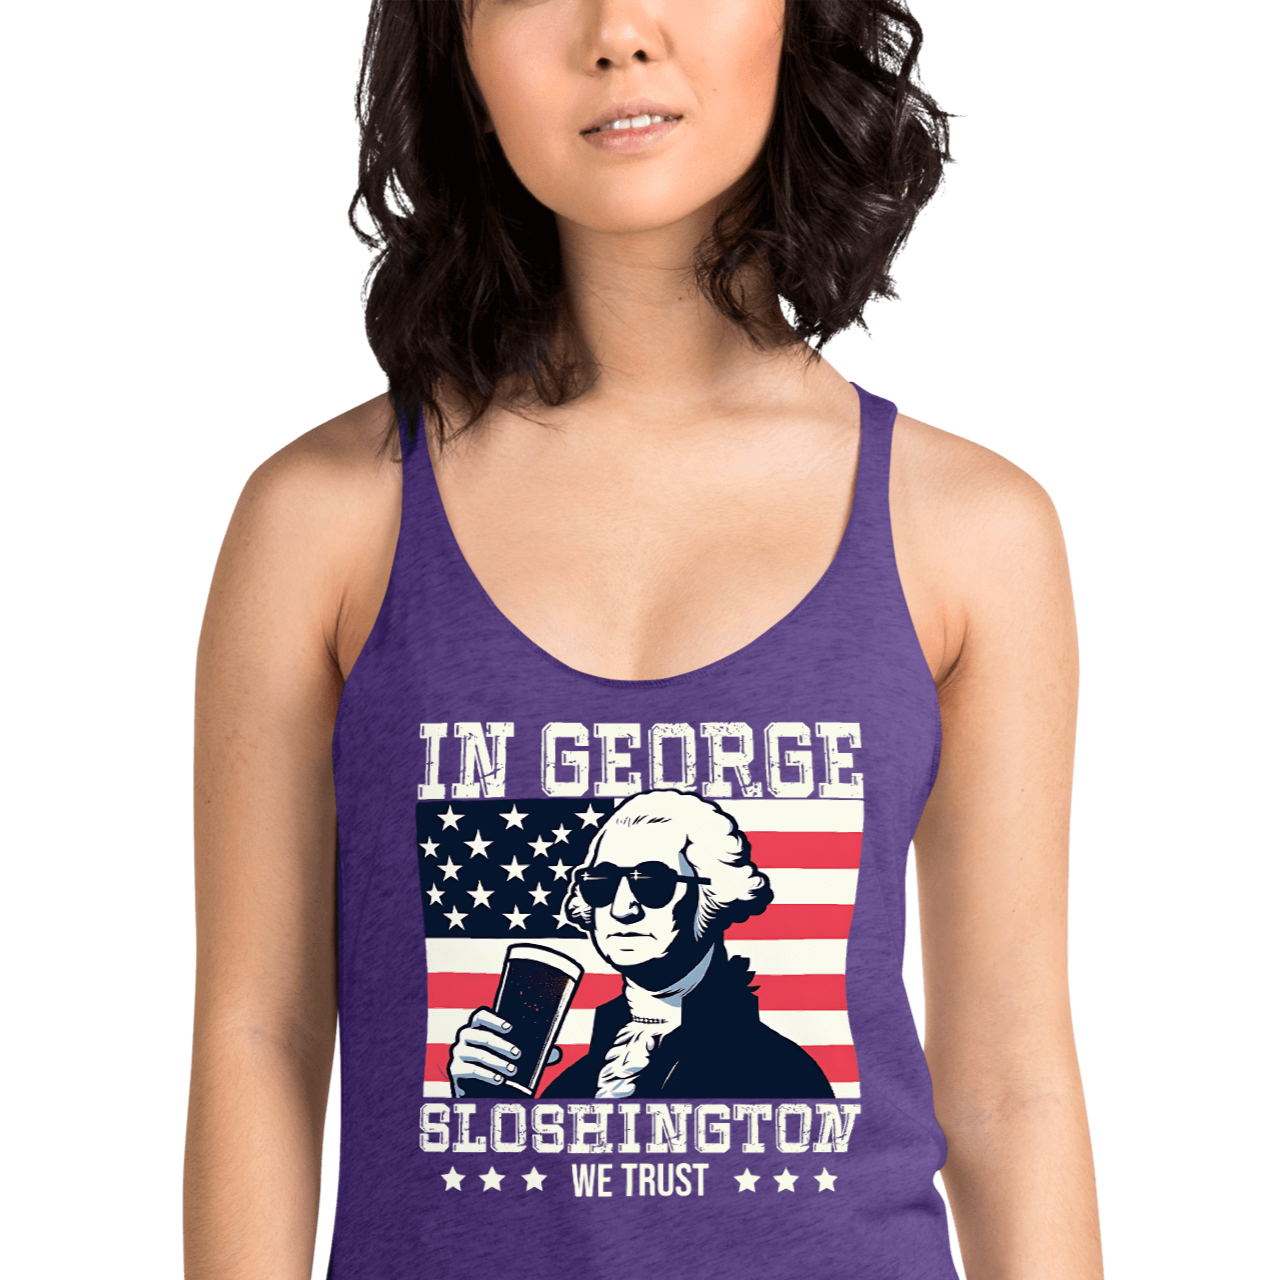 Racerback tank with In George Sloshington We Trust text, image of George Washington drinking a beer, and distressed American flag background. Perfect for 4th of July.